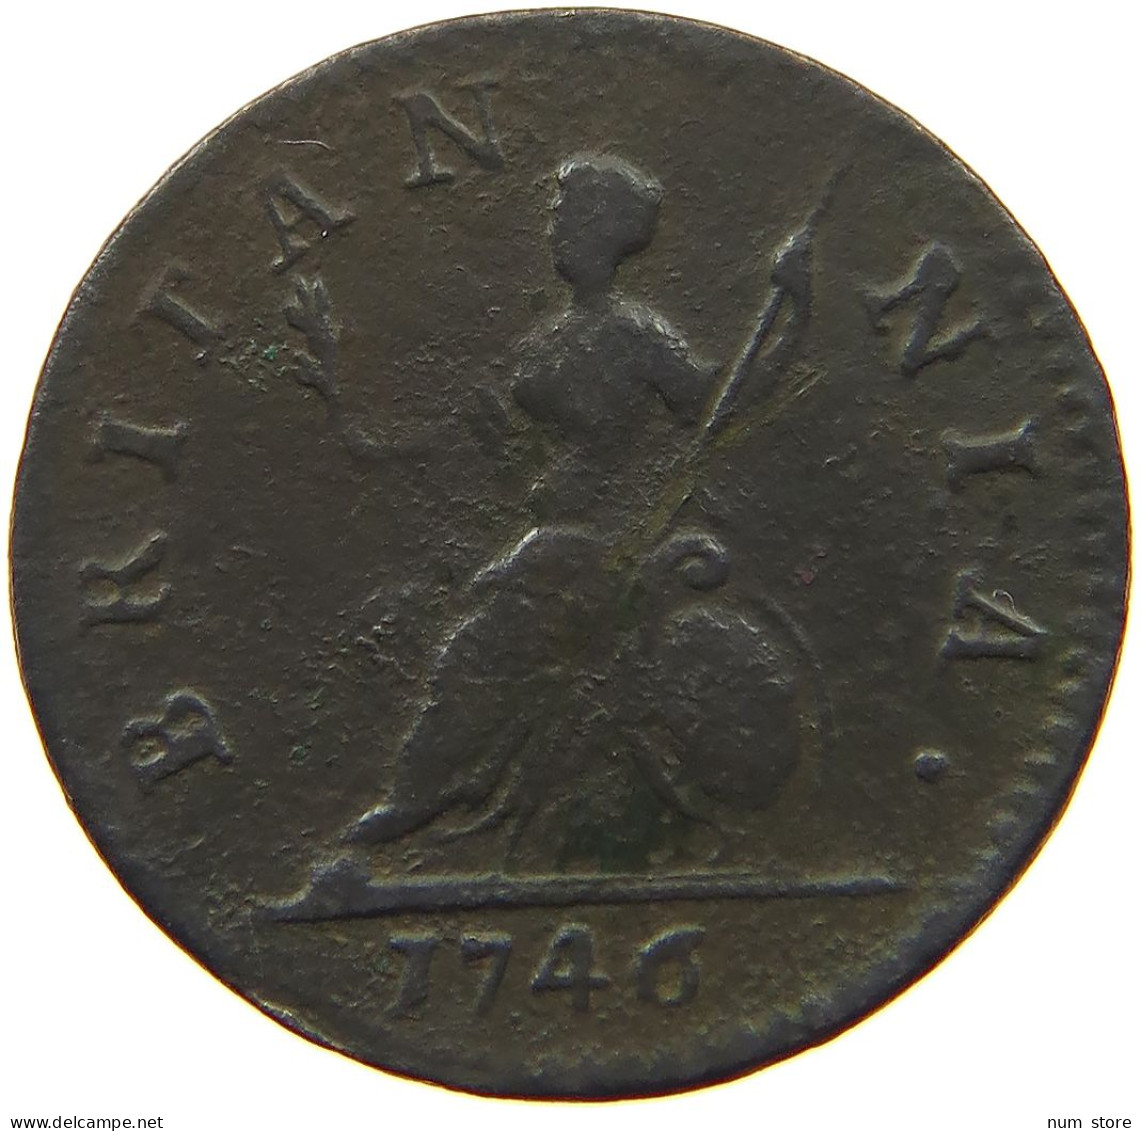 GREAT BRITAIN FARTHING 1746 George II. 1727-1760. #t149 0211 - A. 1 Farthing